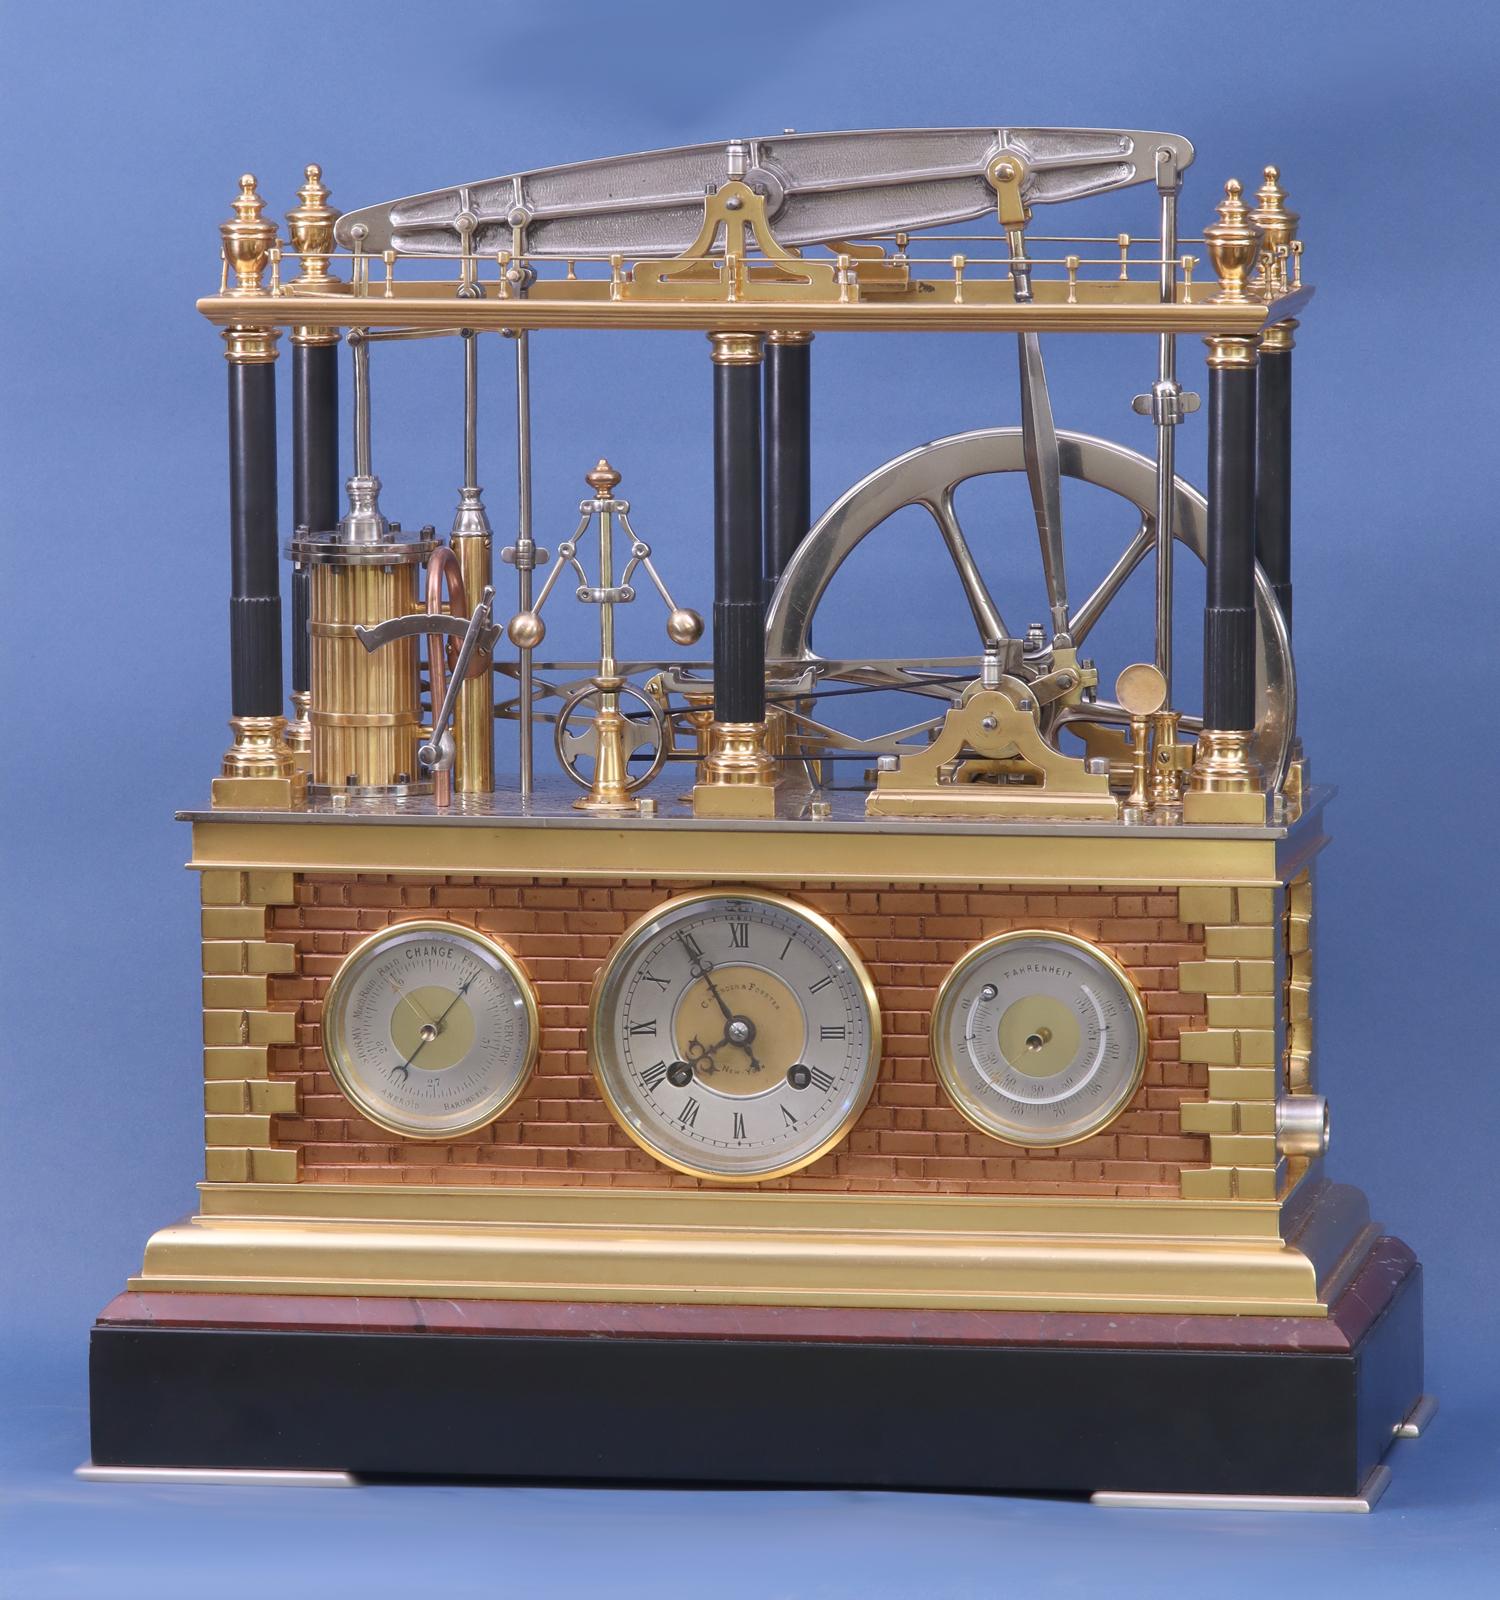 Maker:	
Retailed by Camerden & Forster, New York.
Most likely made by Diette Hour.

Description:	
Rare late-19th century animated industrial clock depicting a version of the double watt steam engine.

Case:	
The multi-finished decorative bronze case